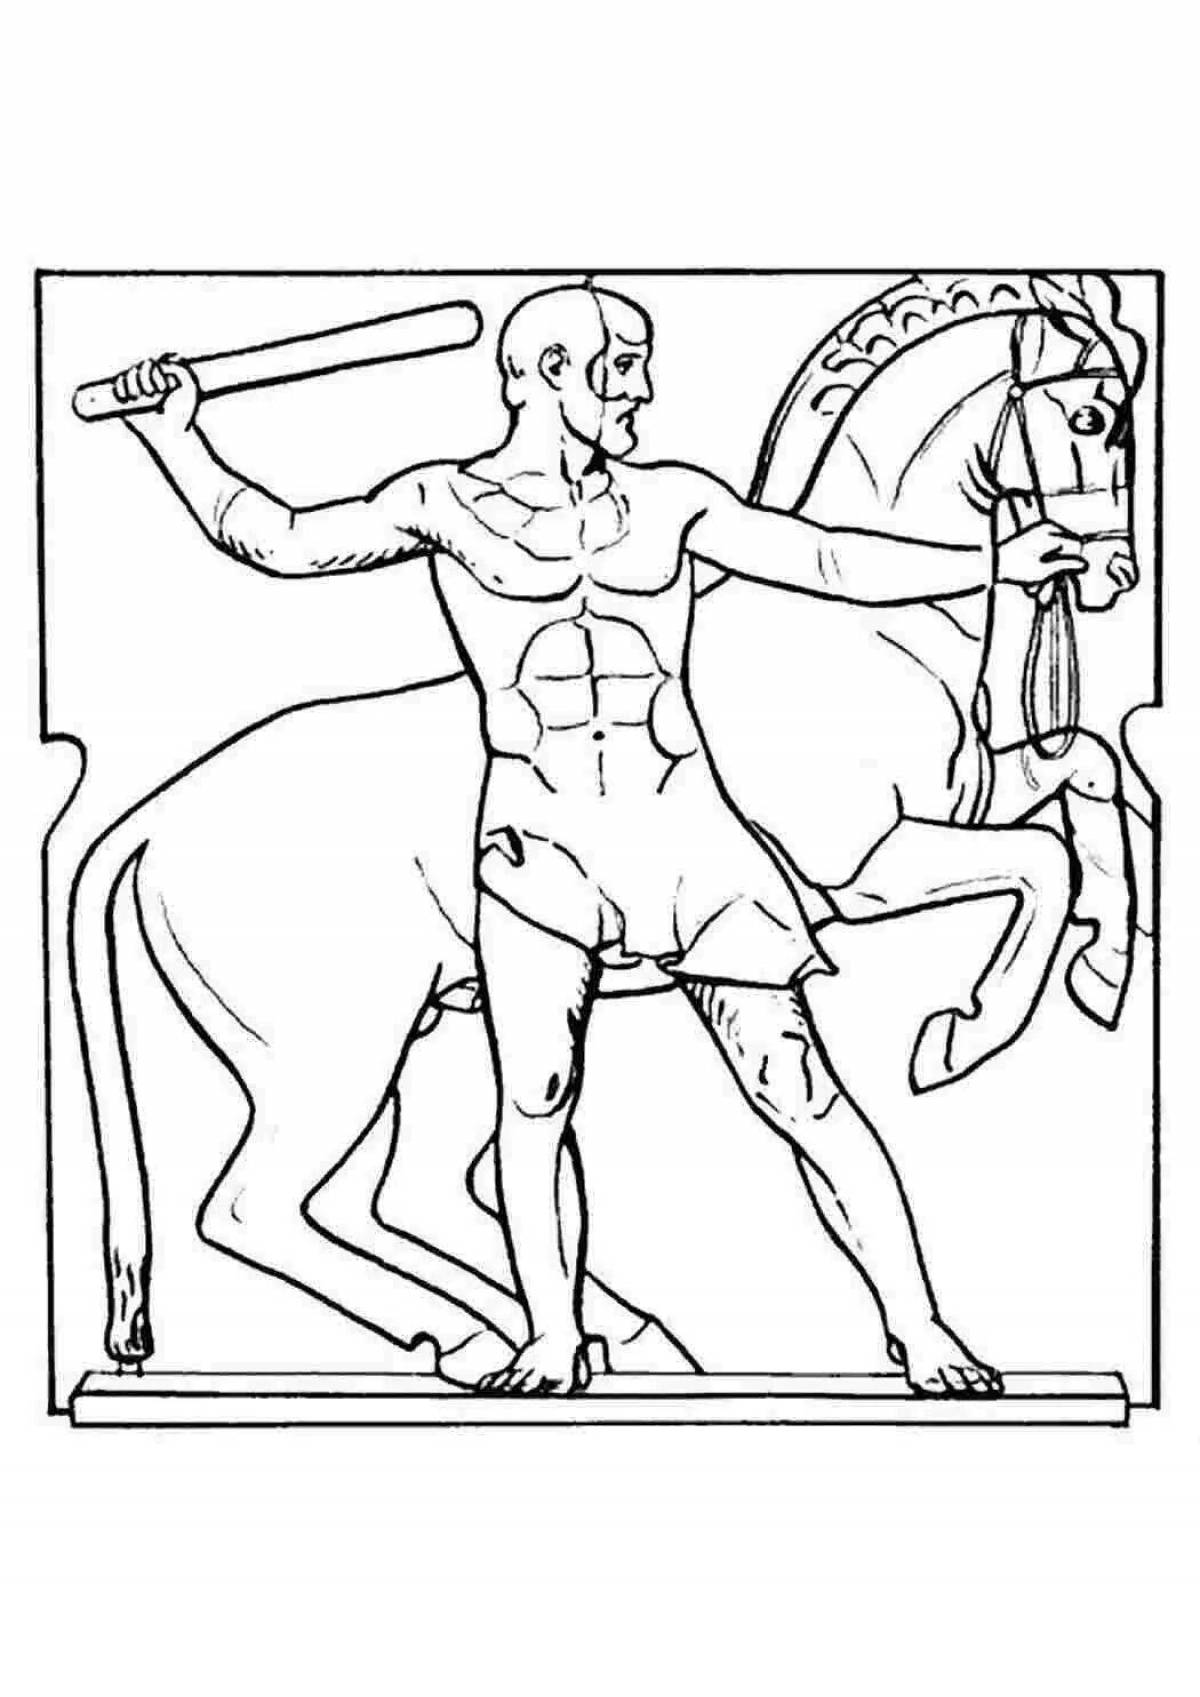 Coloring page wild 12 labors of hercules